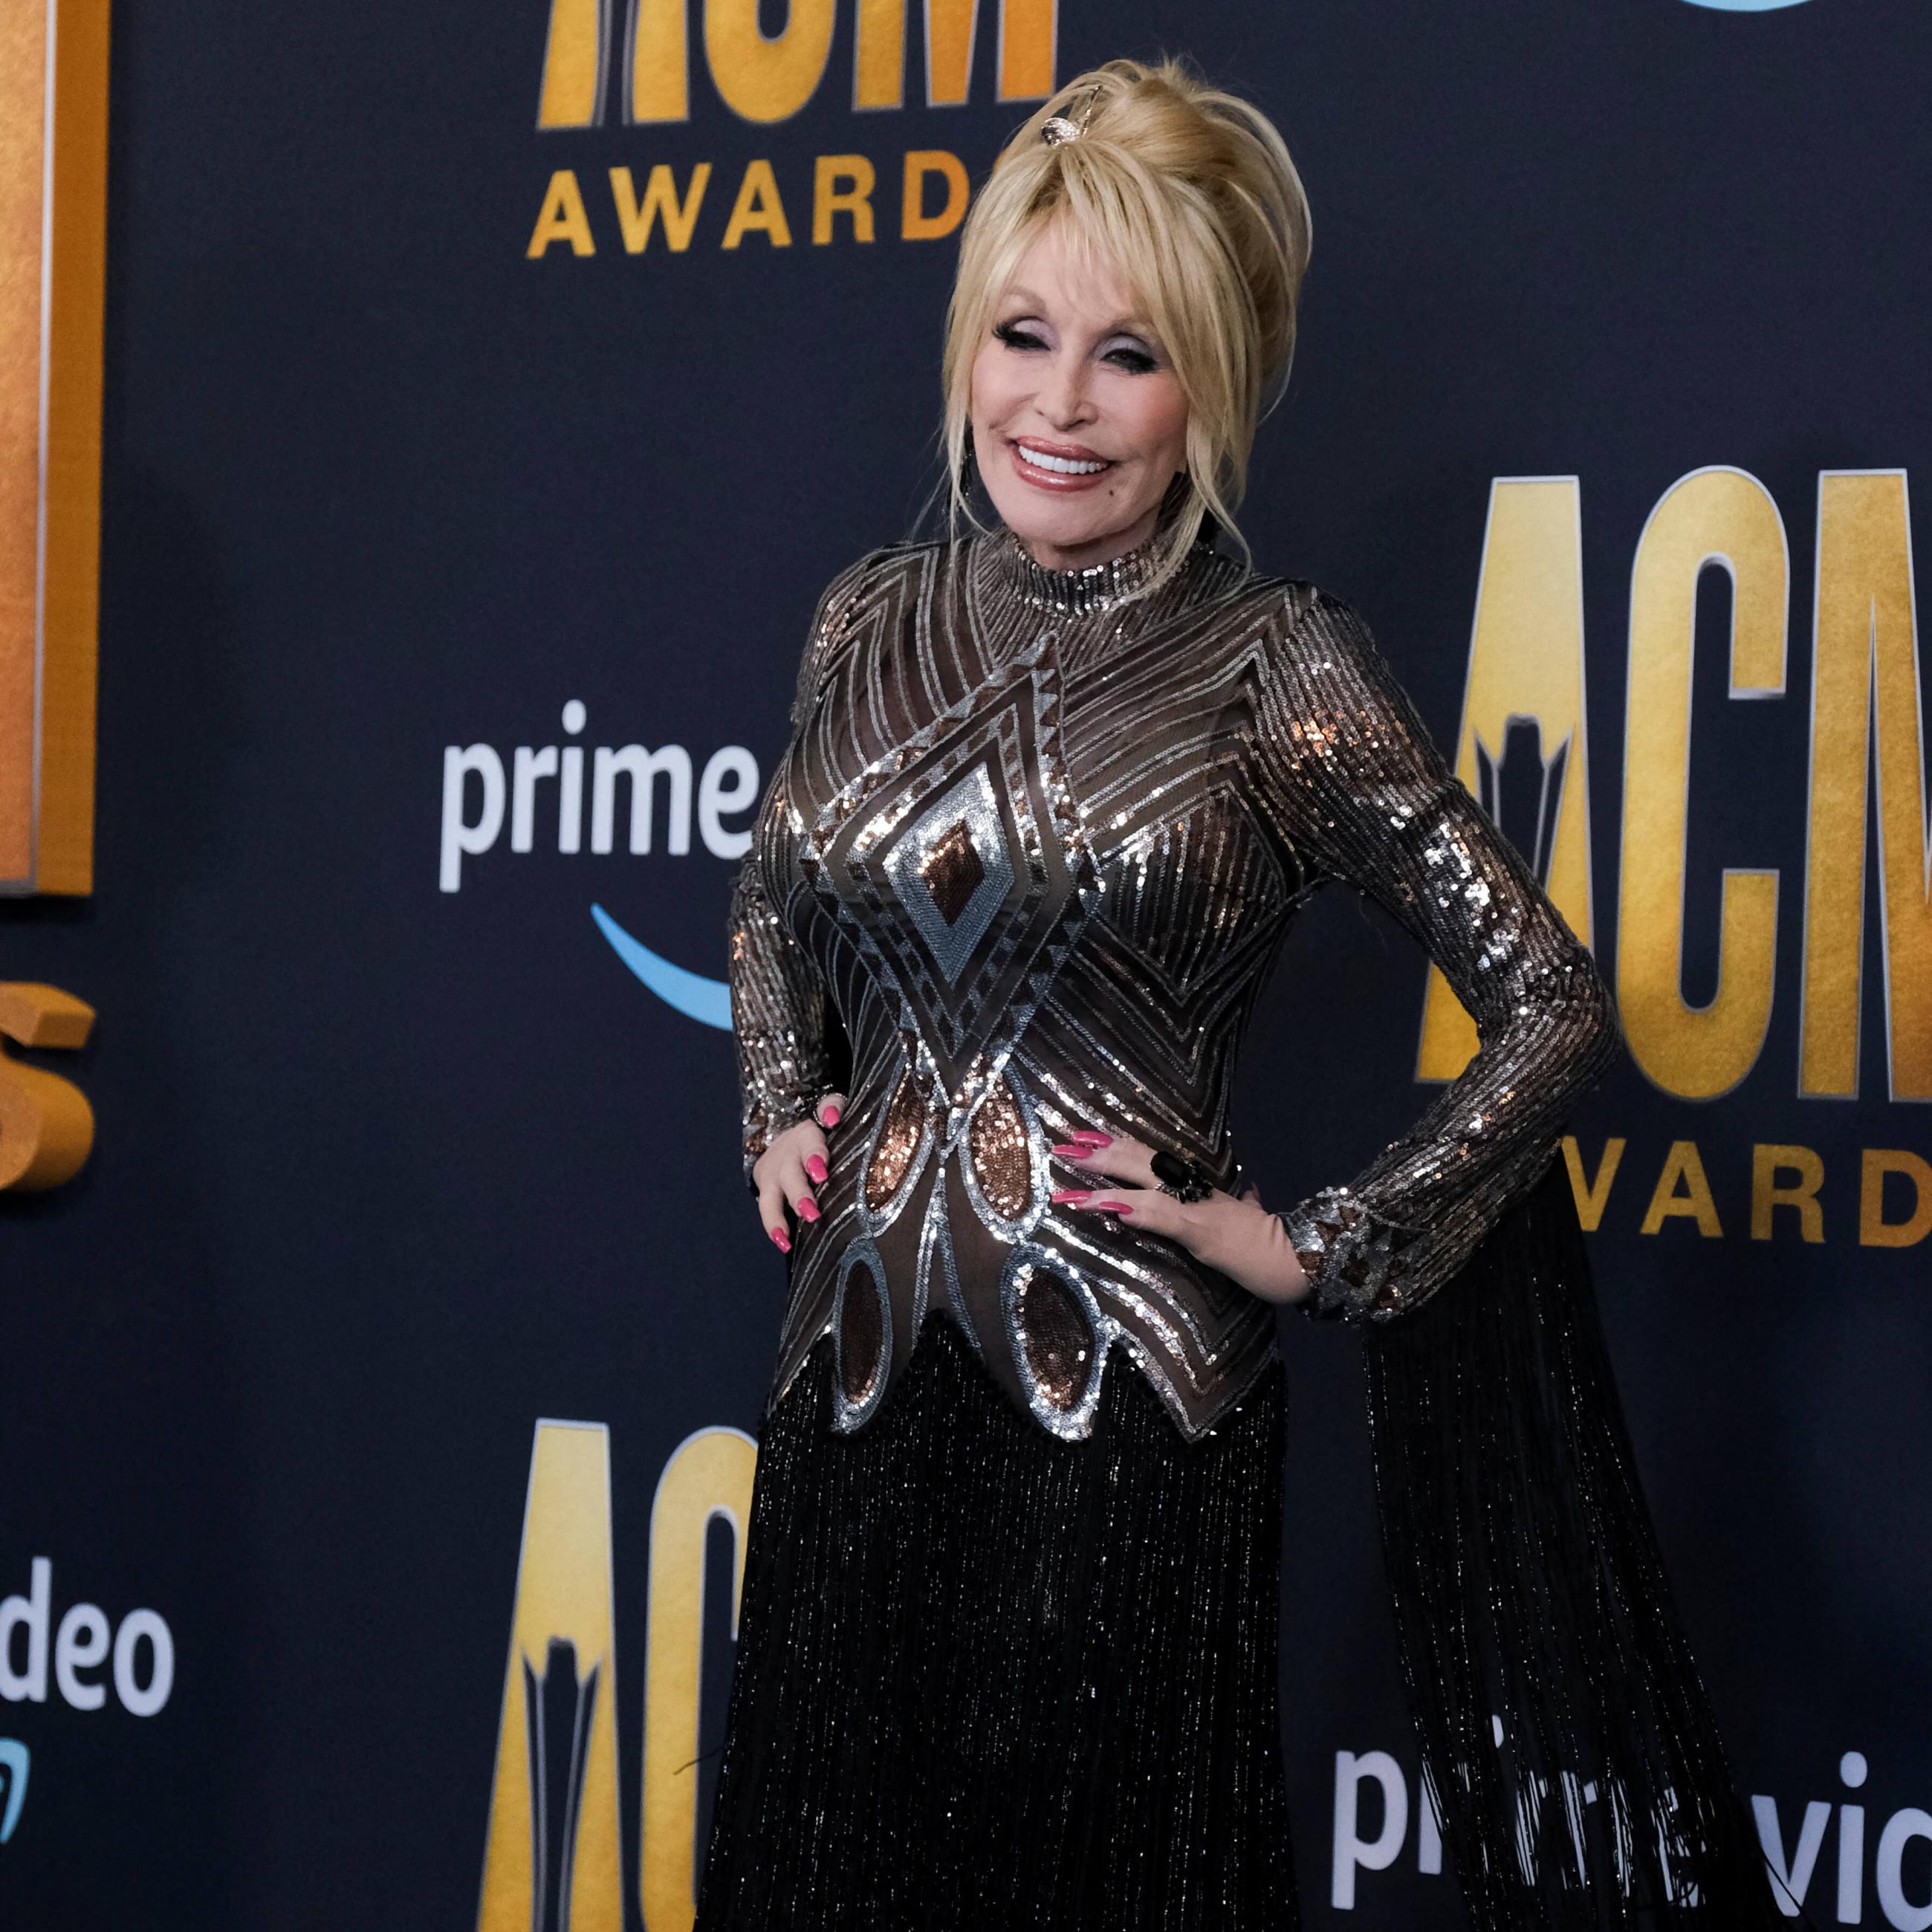 Dolly Parton attending the 57th Annual Academy of Country Music Awards in Las Vegas